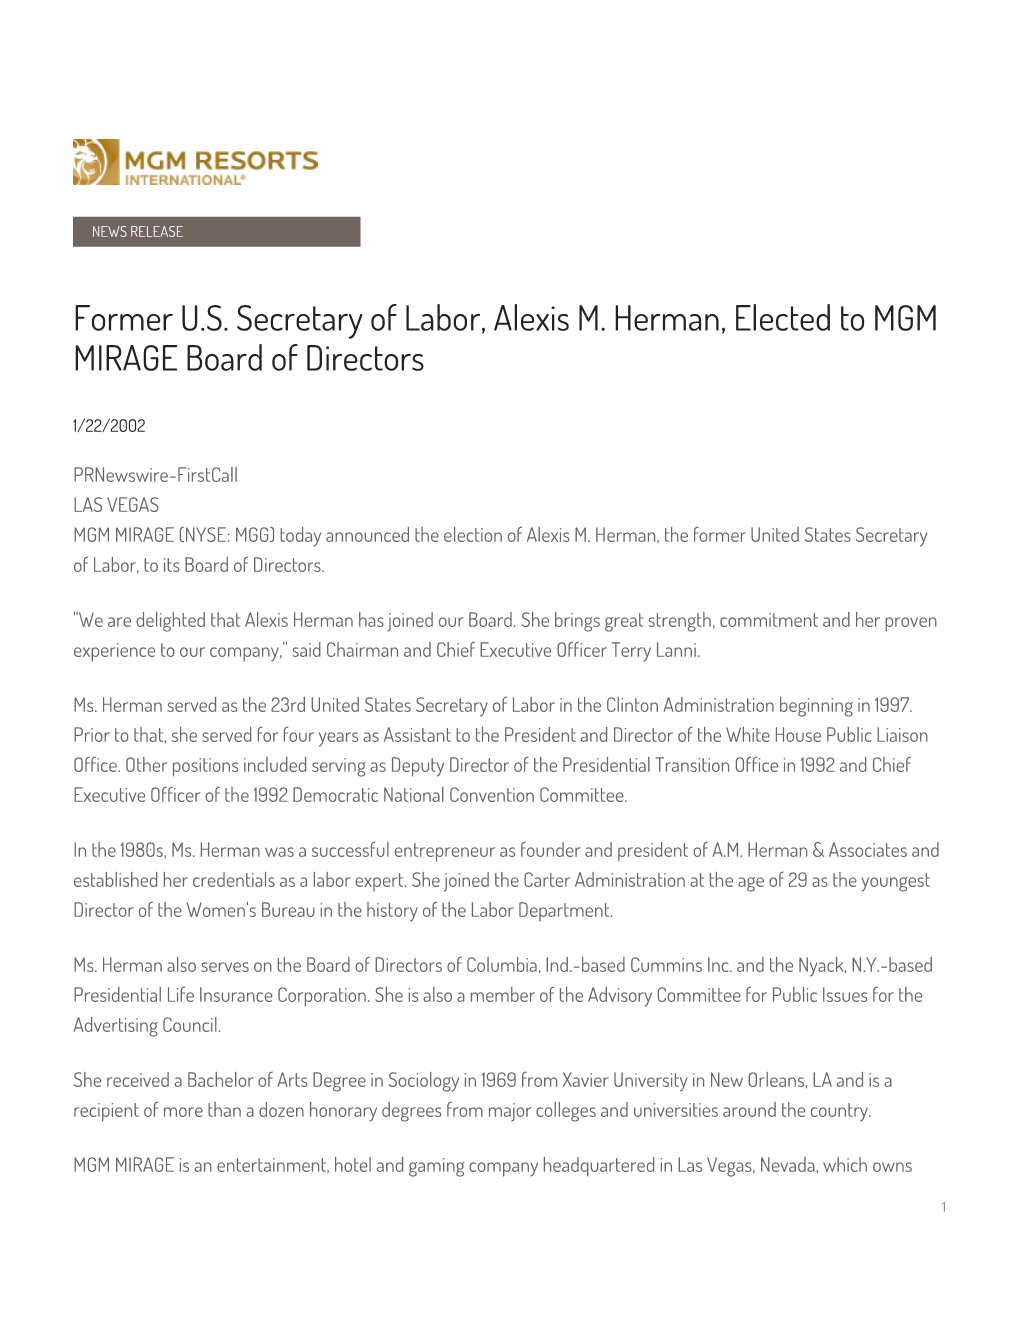 Former U.S. Secretary of Labor, Alexis M. Herman, Elected to MGM MIRAGE Board of Directors